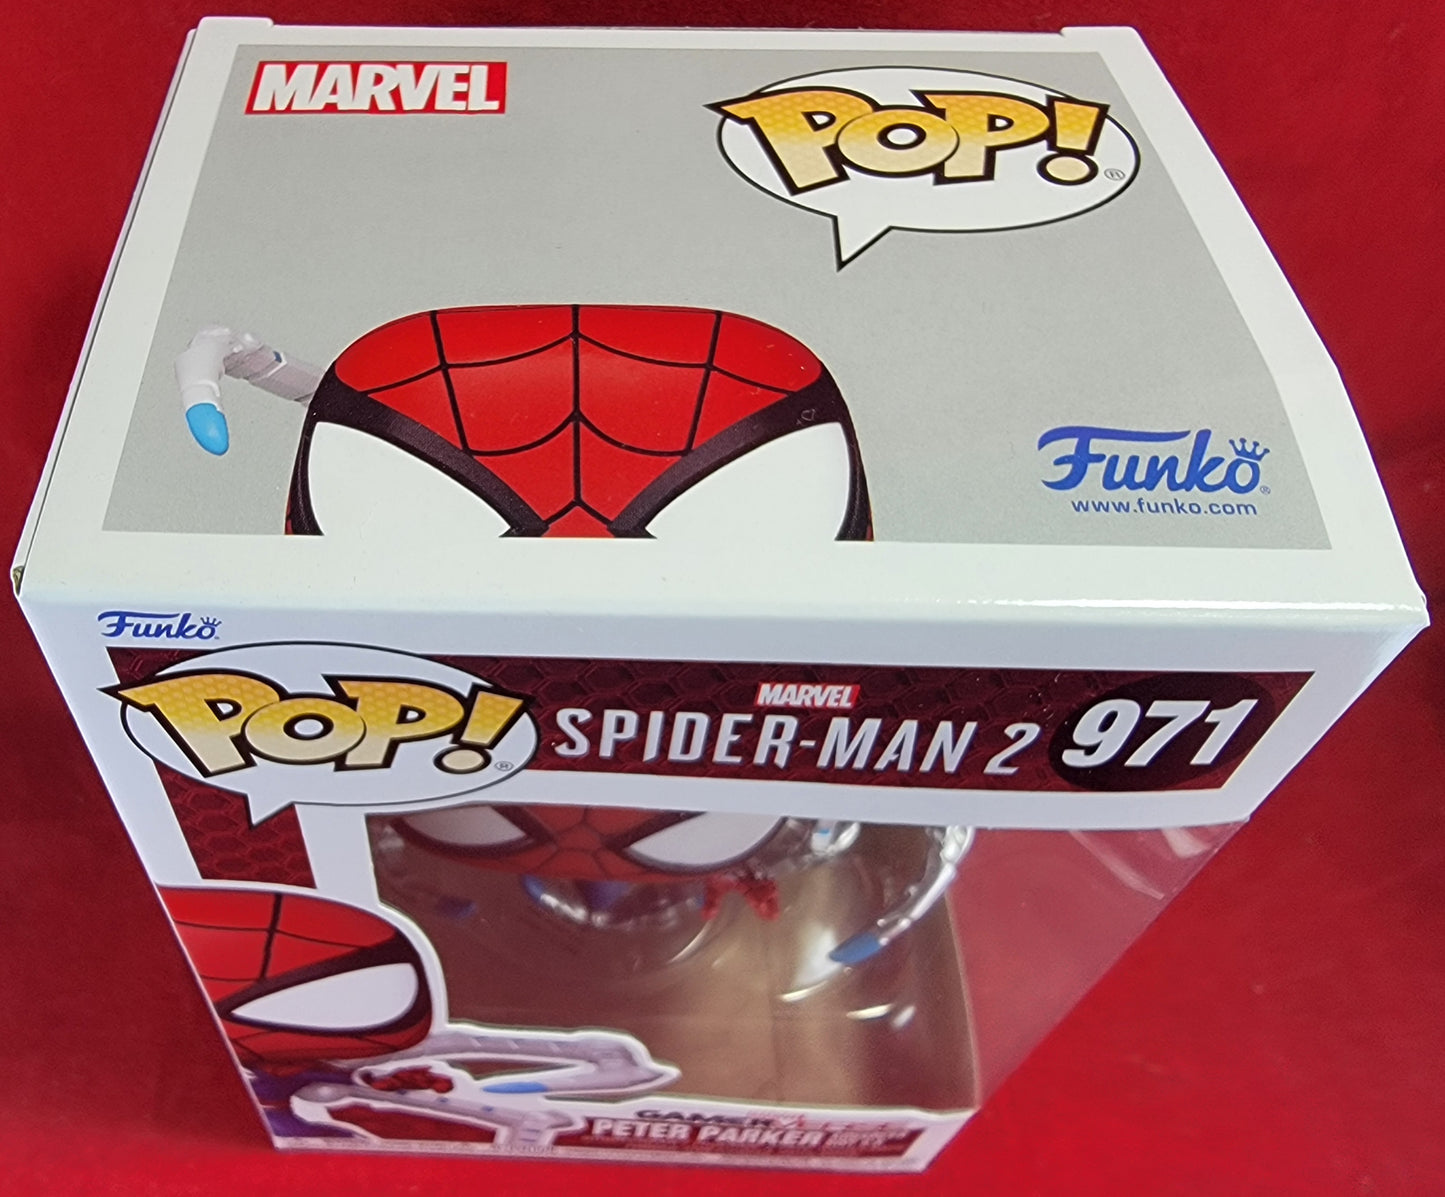 Peter Parker advanced suit 2.0 funko # 971 (nib)
With pop protector